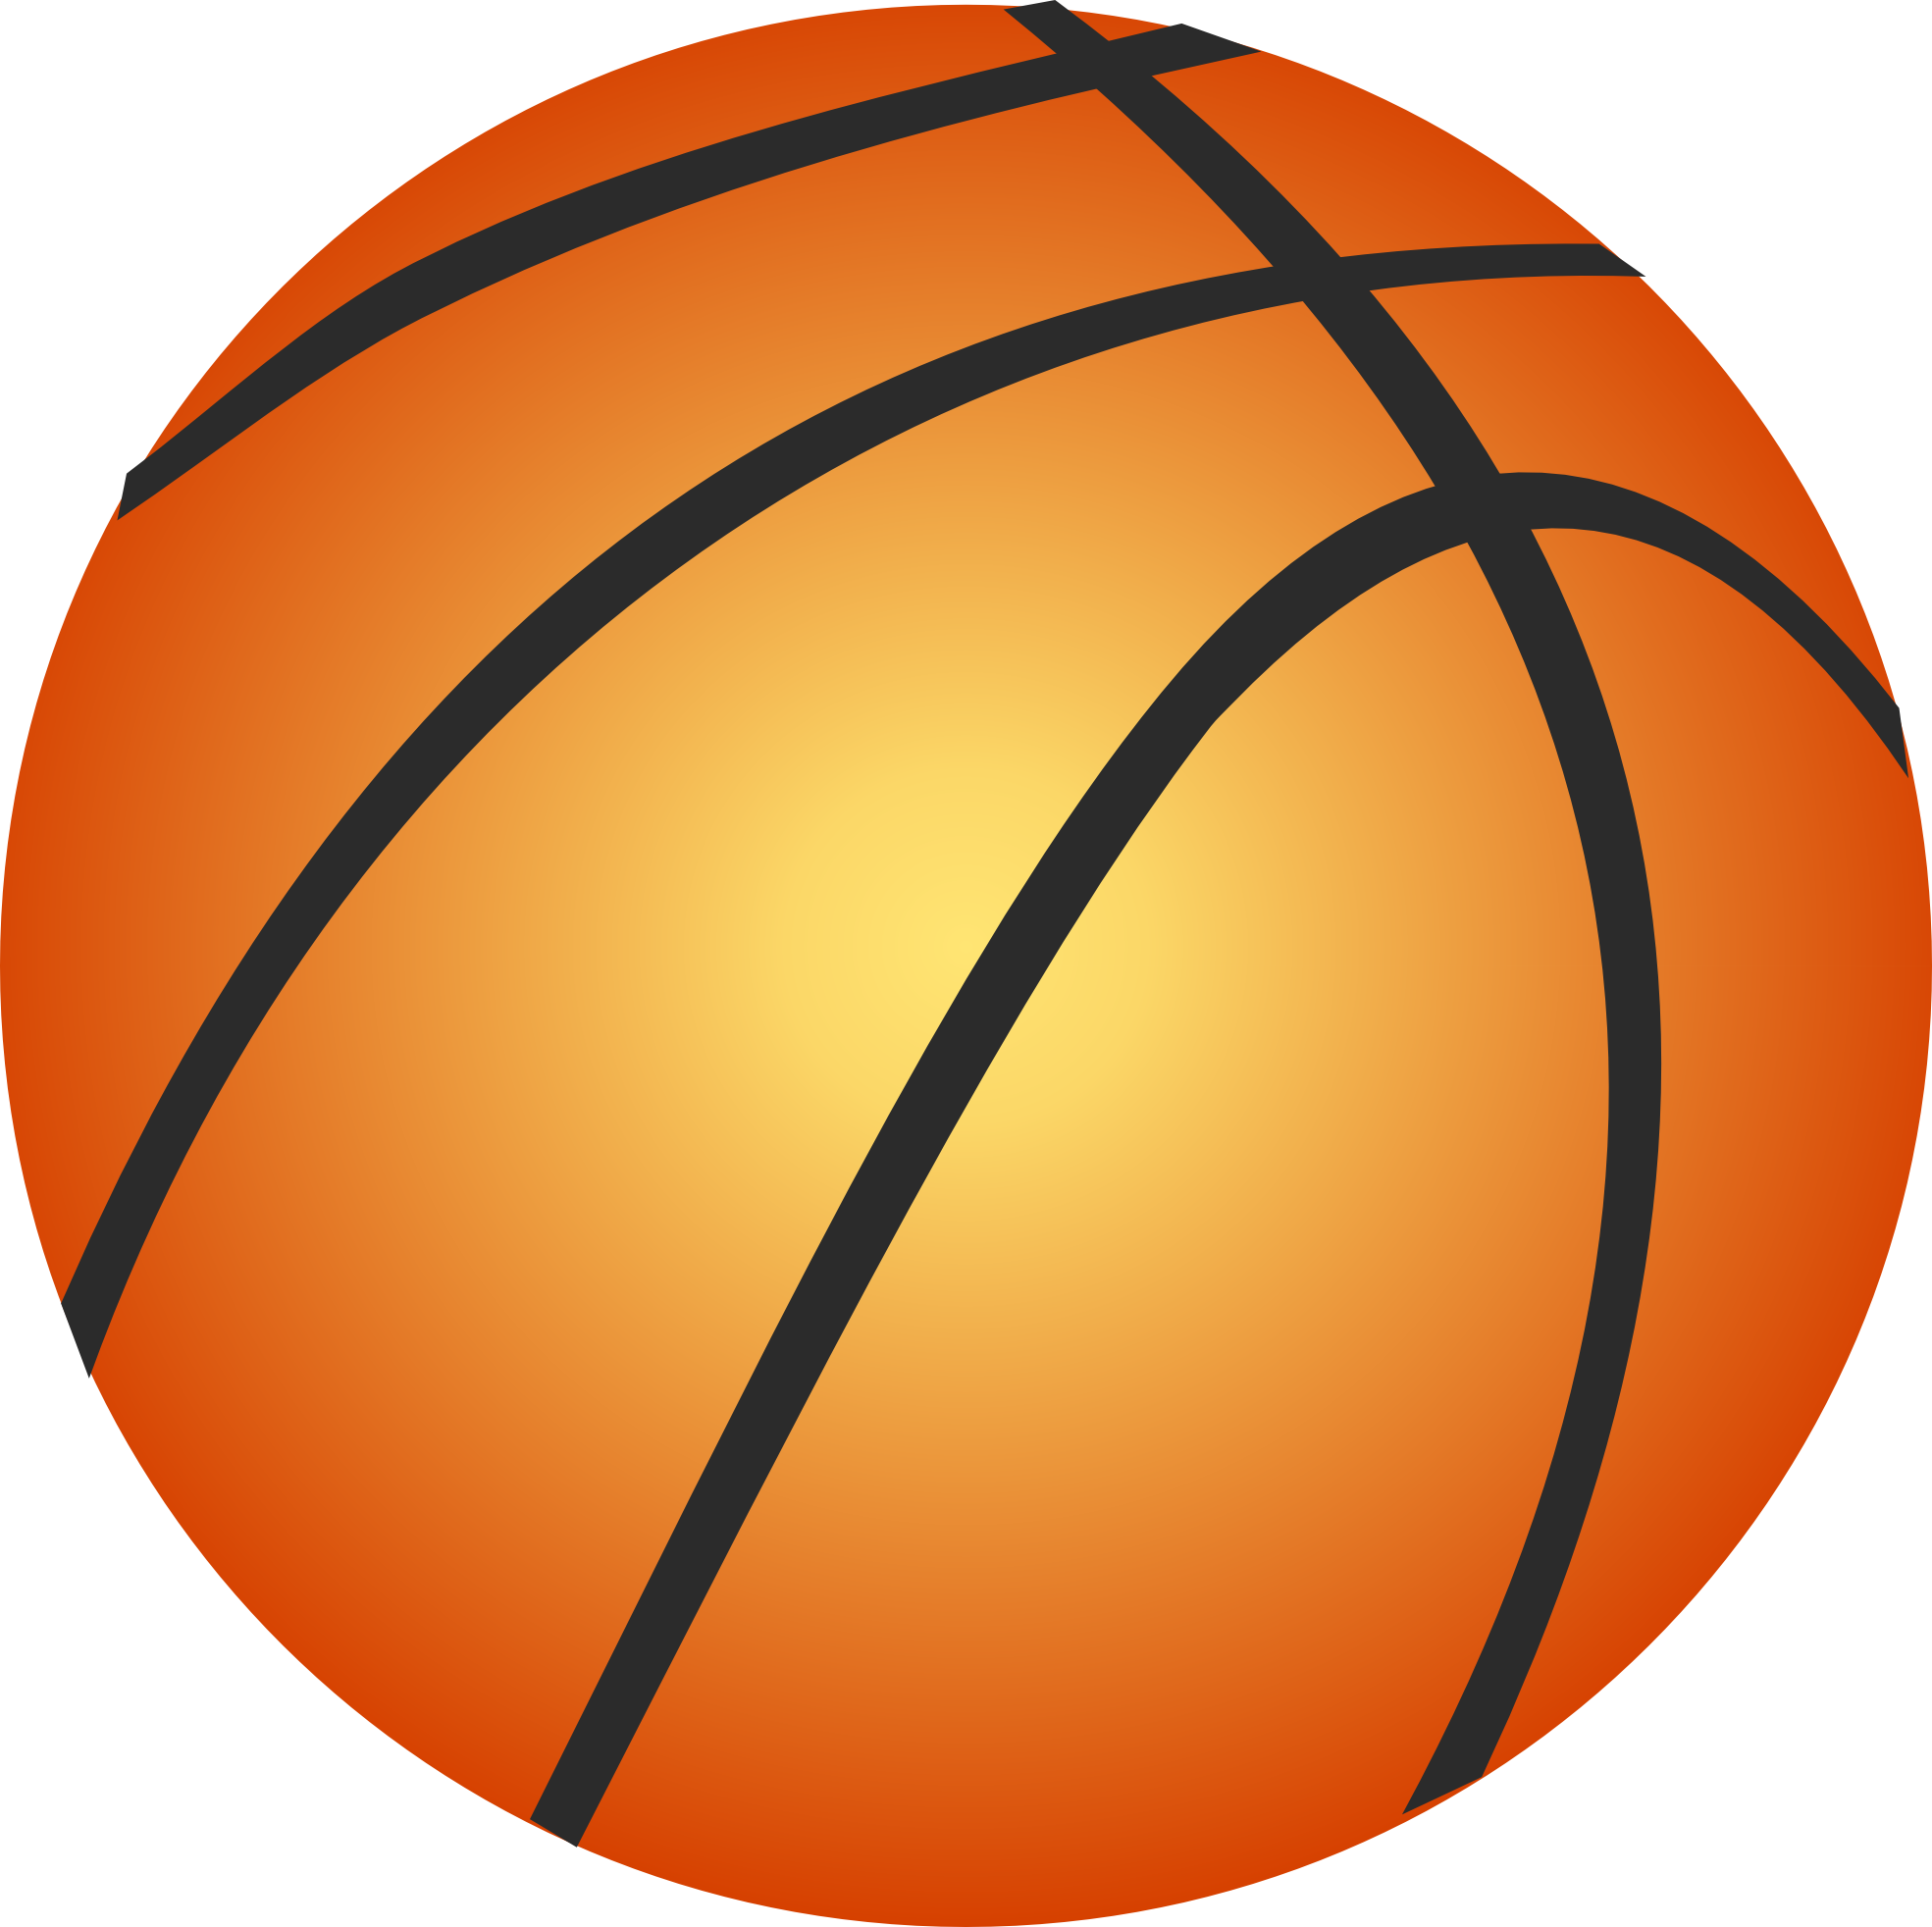 Basketball clipart free clipart image 2